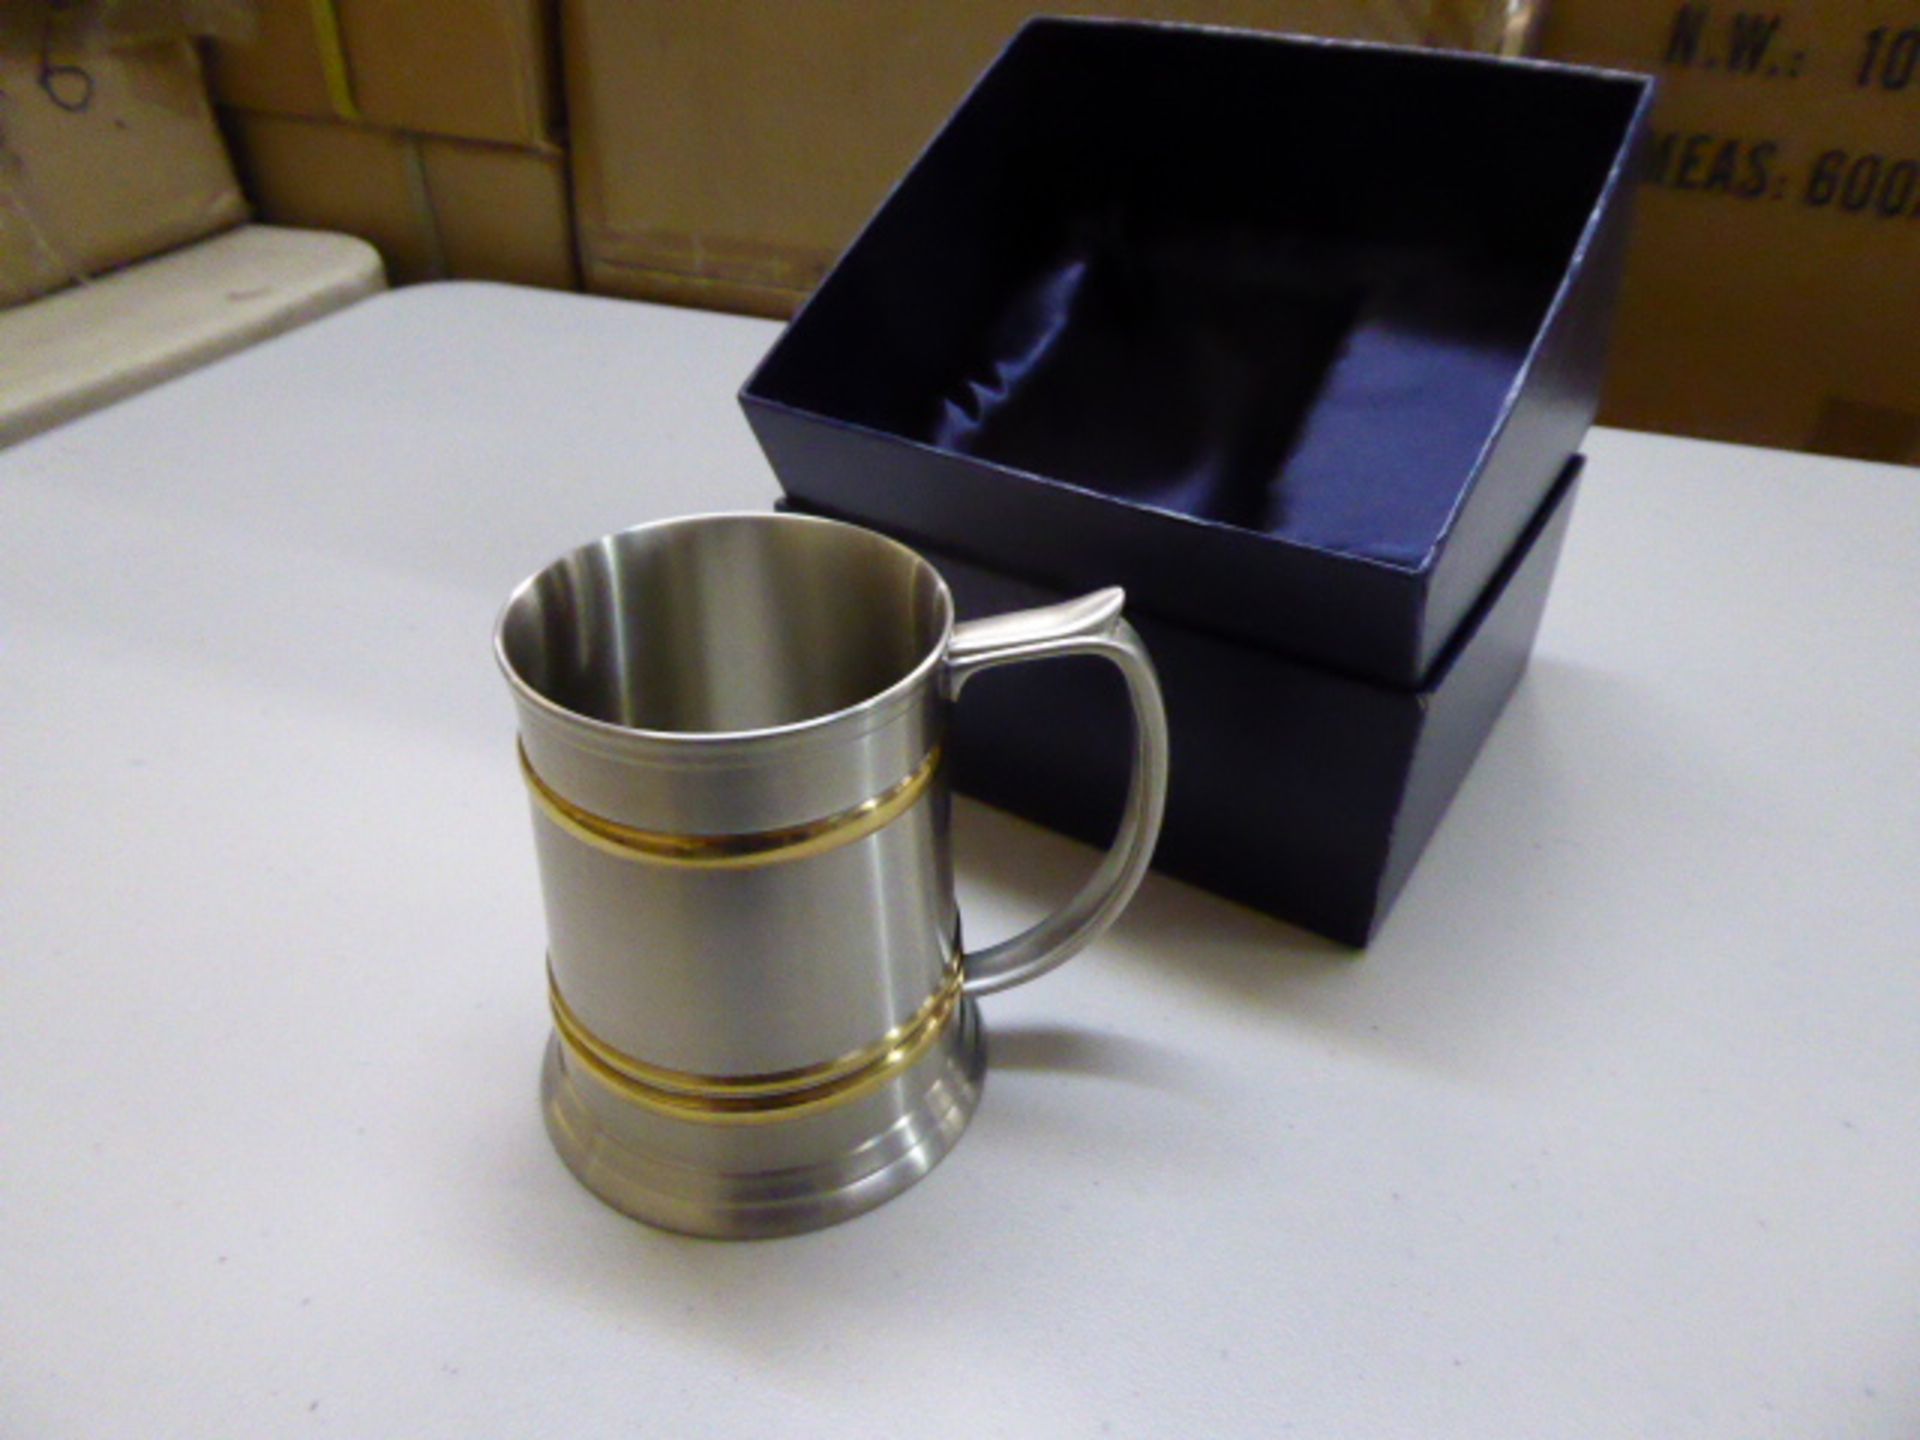 24 pewter tankards with brass colour detail